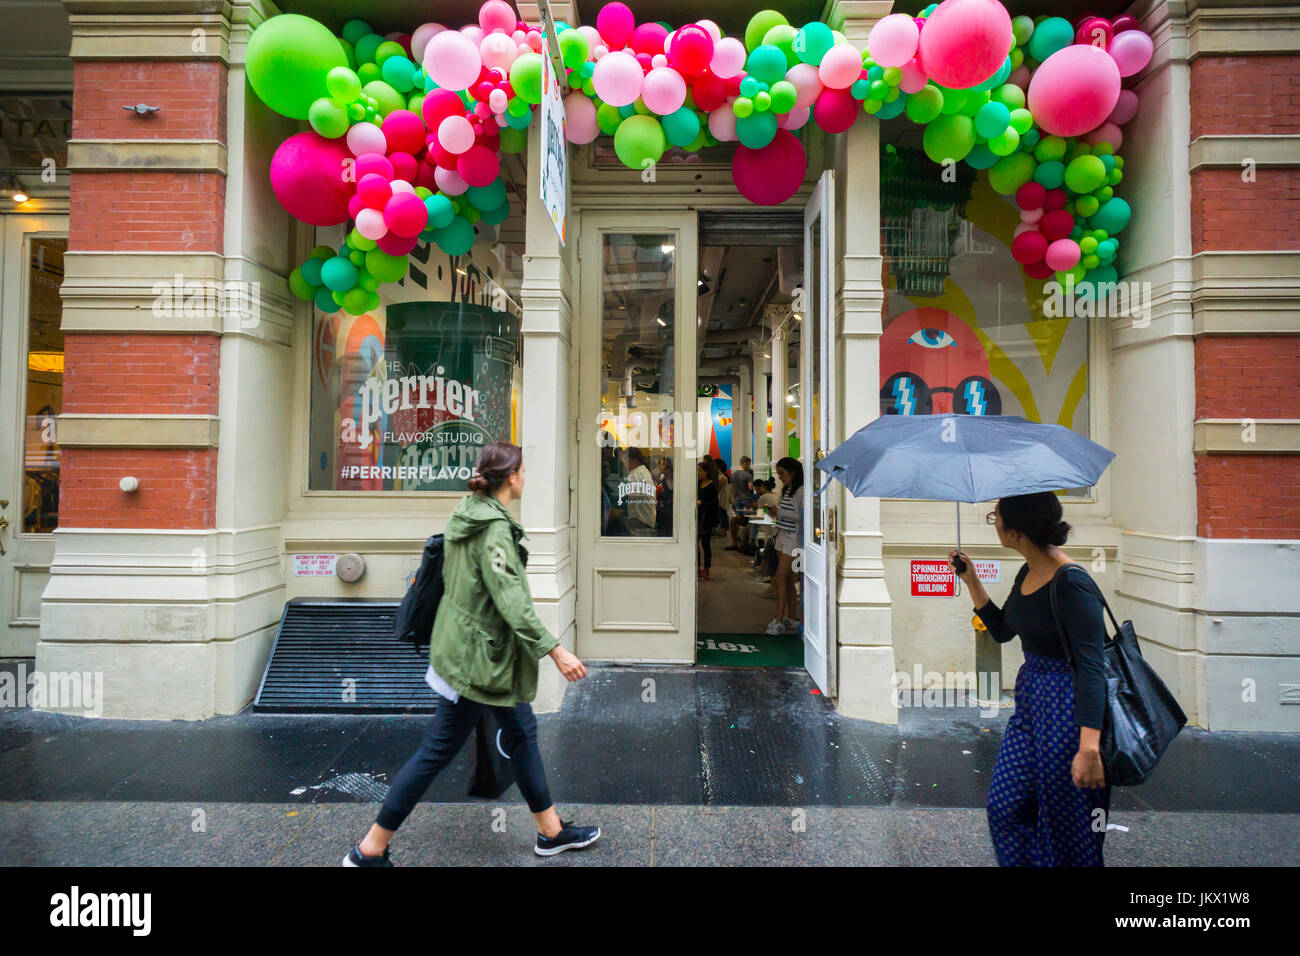 Colorful balloons decorate the front of a Perrier Flavor Studio pop-up promoting new flavors of their carbonated waters, seen in Soho in New York on Friday, July 14, 2017 (© Richard B. Levine) Stock Photo